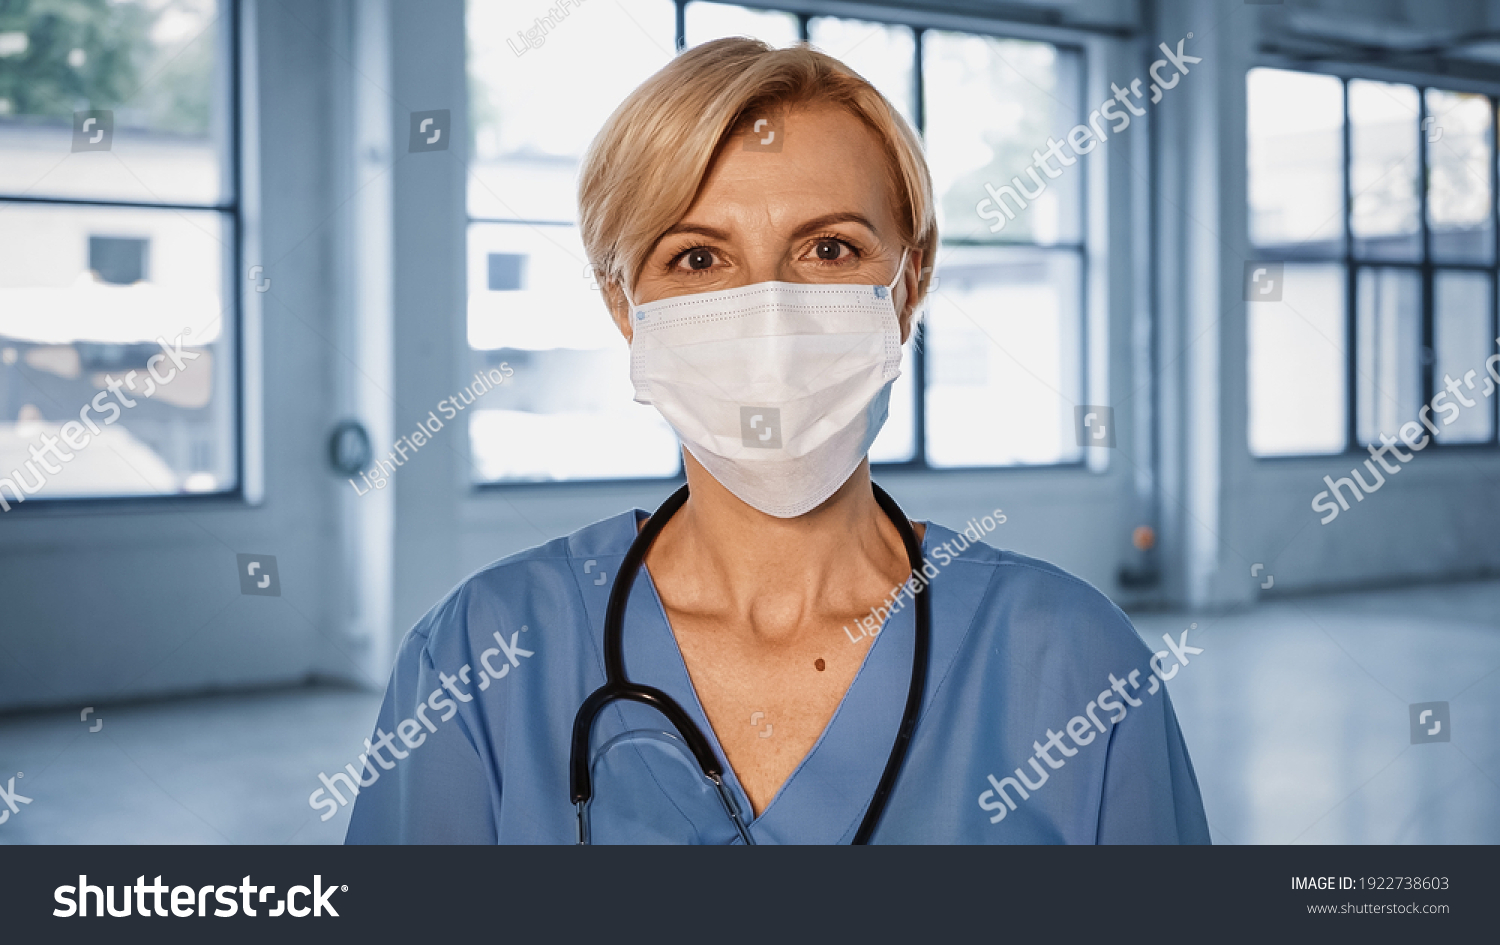 Mature doctor in medical mask looking at camera in hospital #1922738603